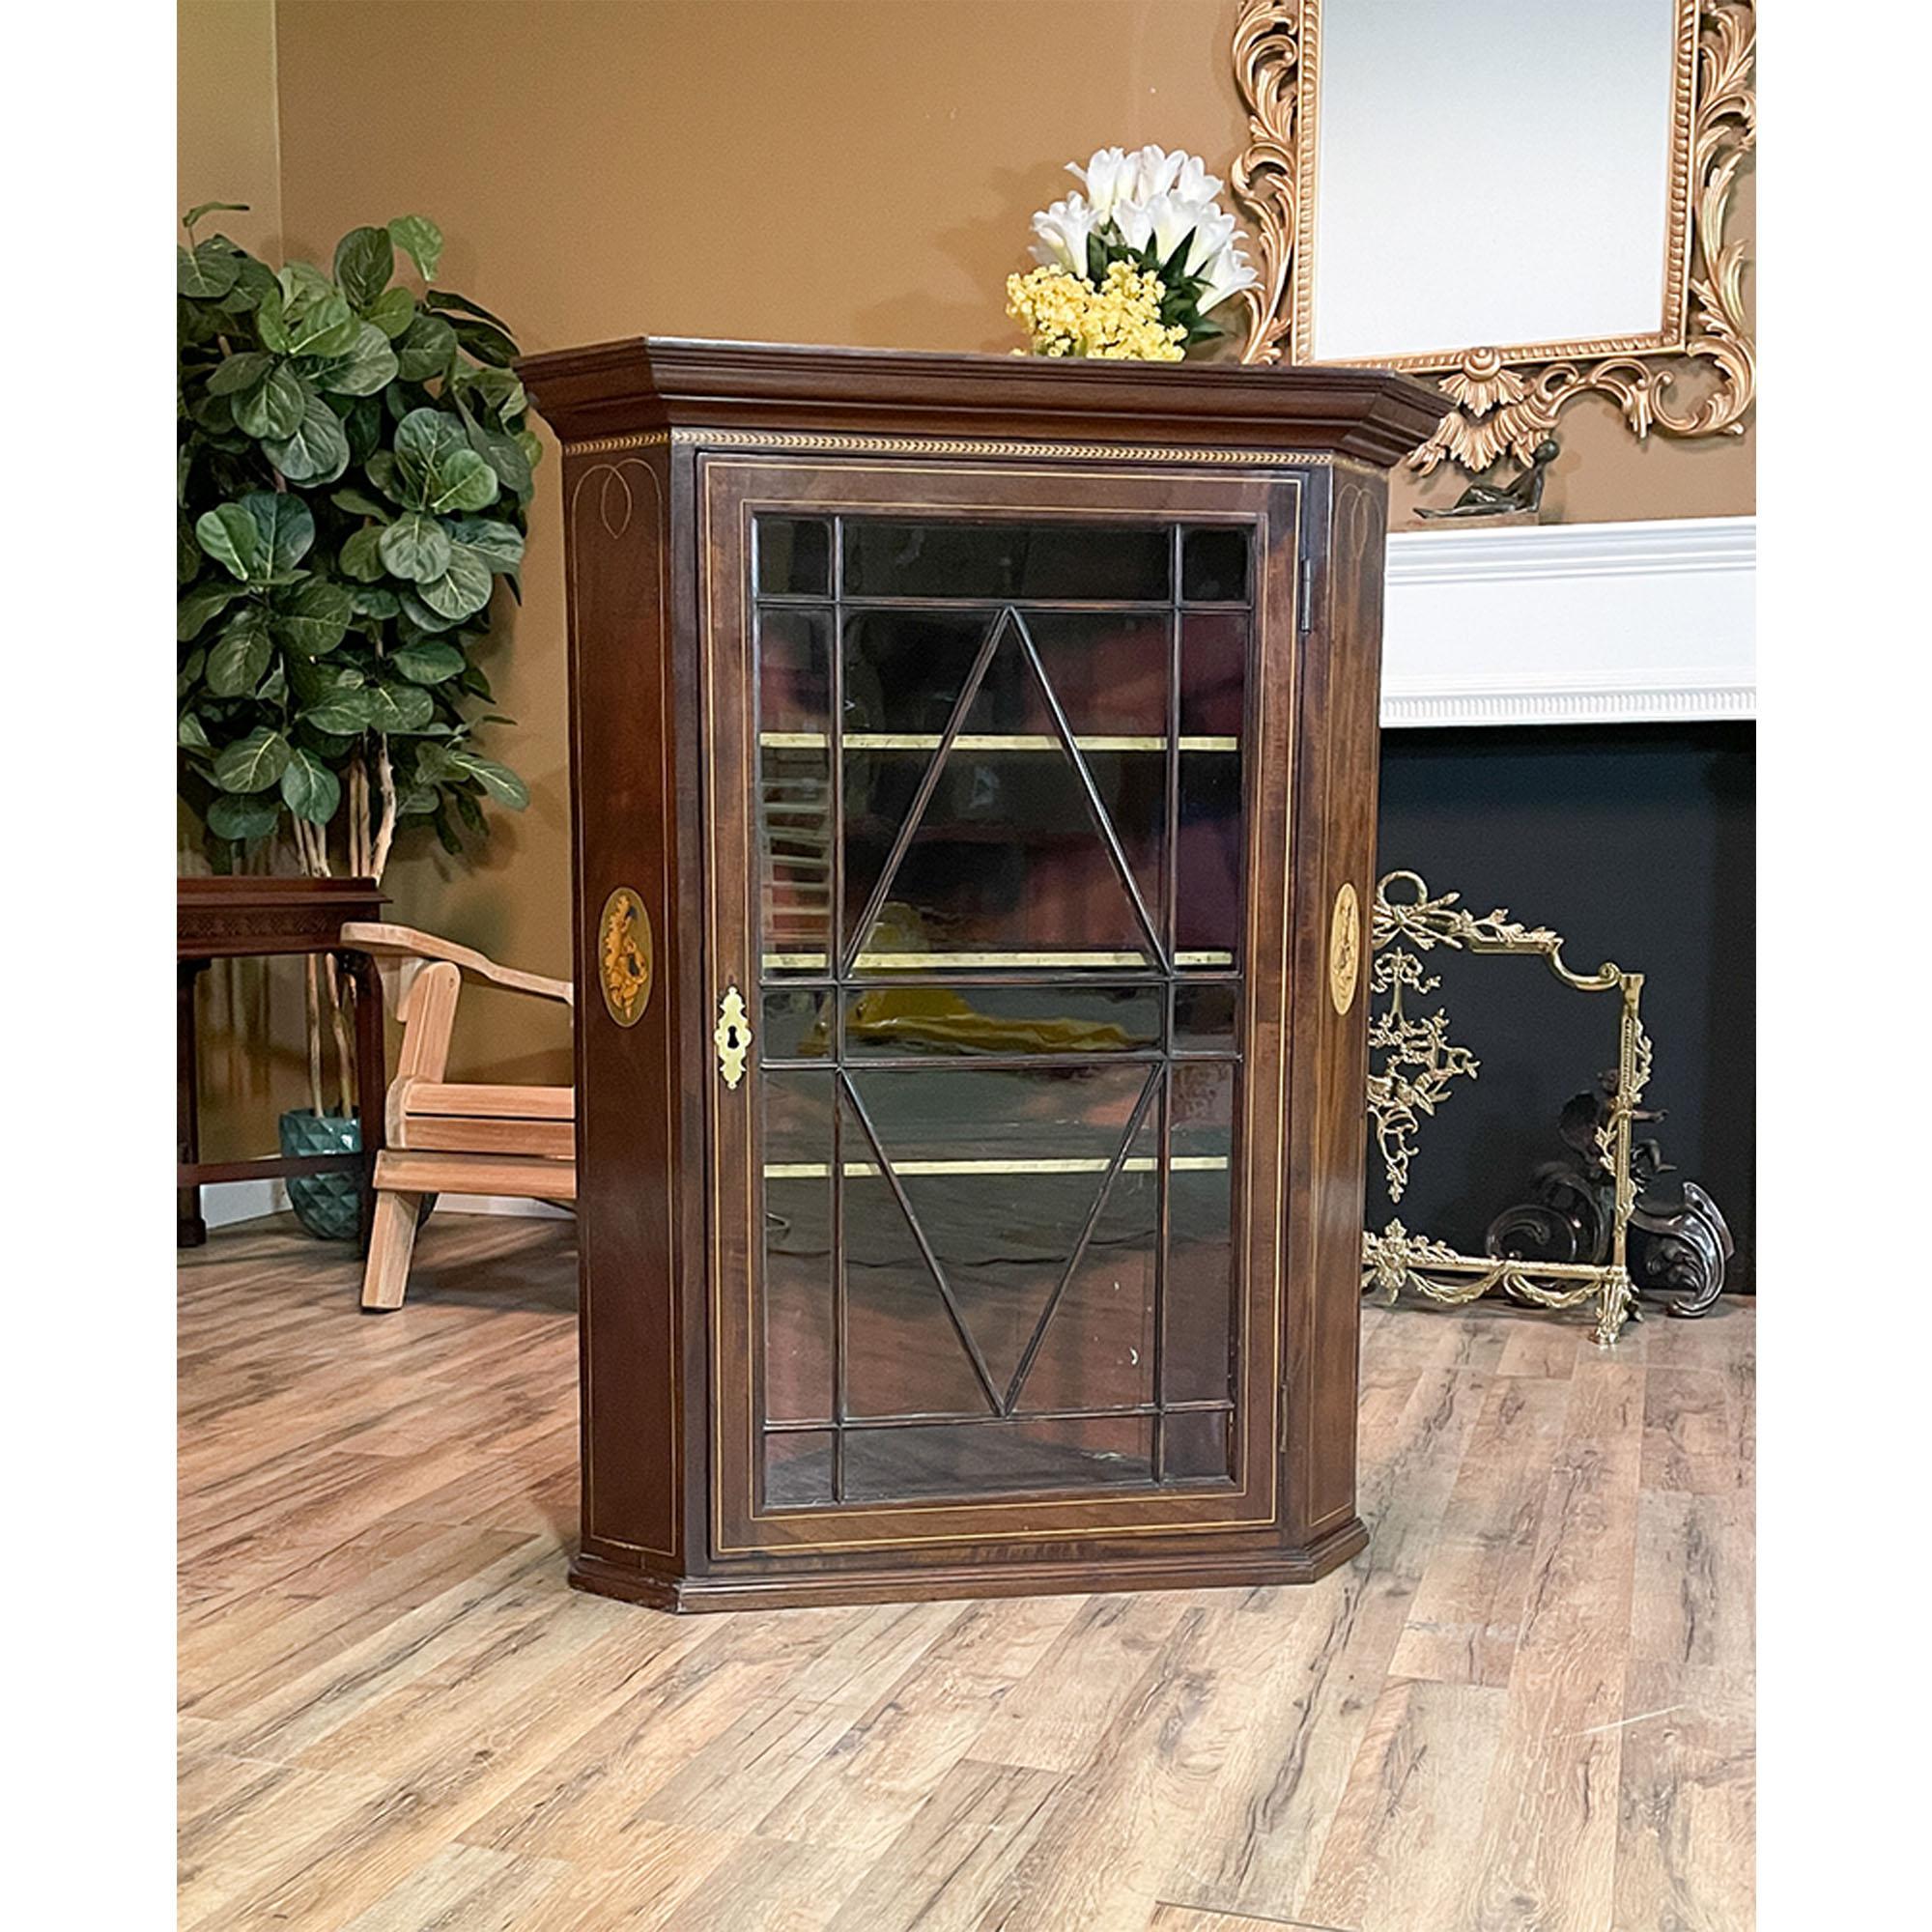 An Antique Inlaid Hanging Mahogany Corner Cabinet. The Antique Inlaid Hanging Mahogany Corner Cabinet features a beautiful carved molding along the top with hand inlaid patterns below. The corner cabinet has individual lattice work in the doors and